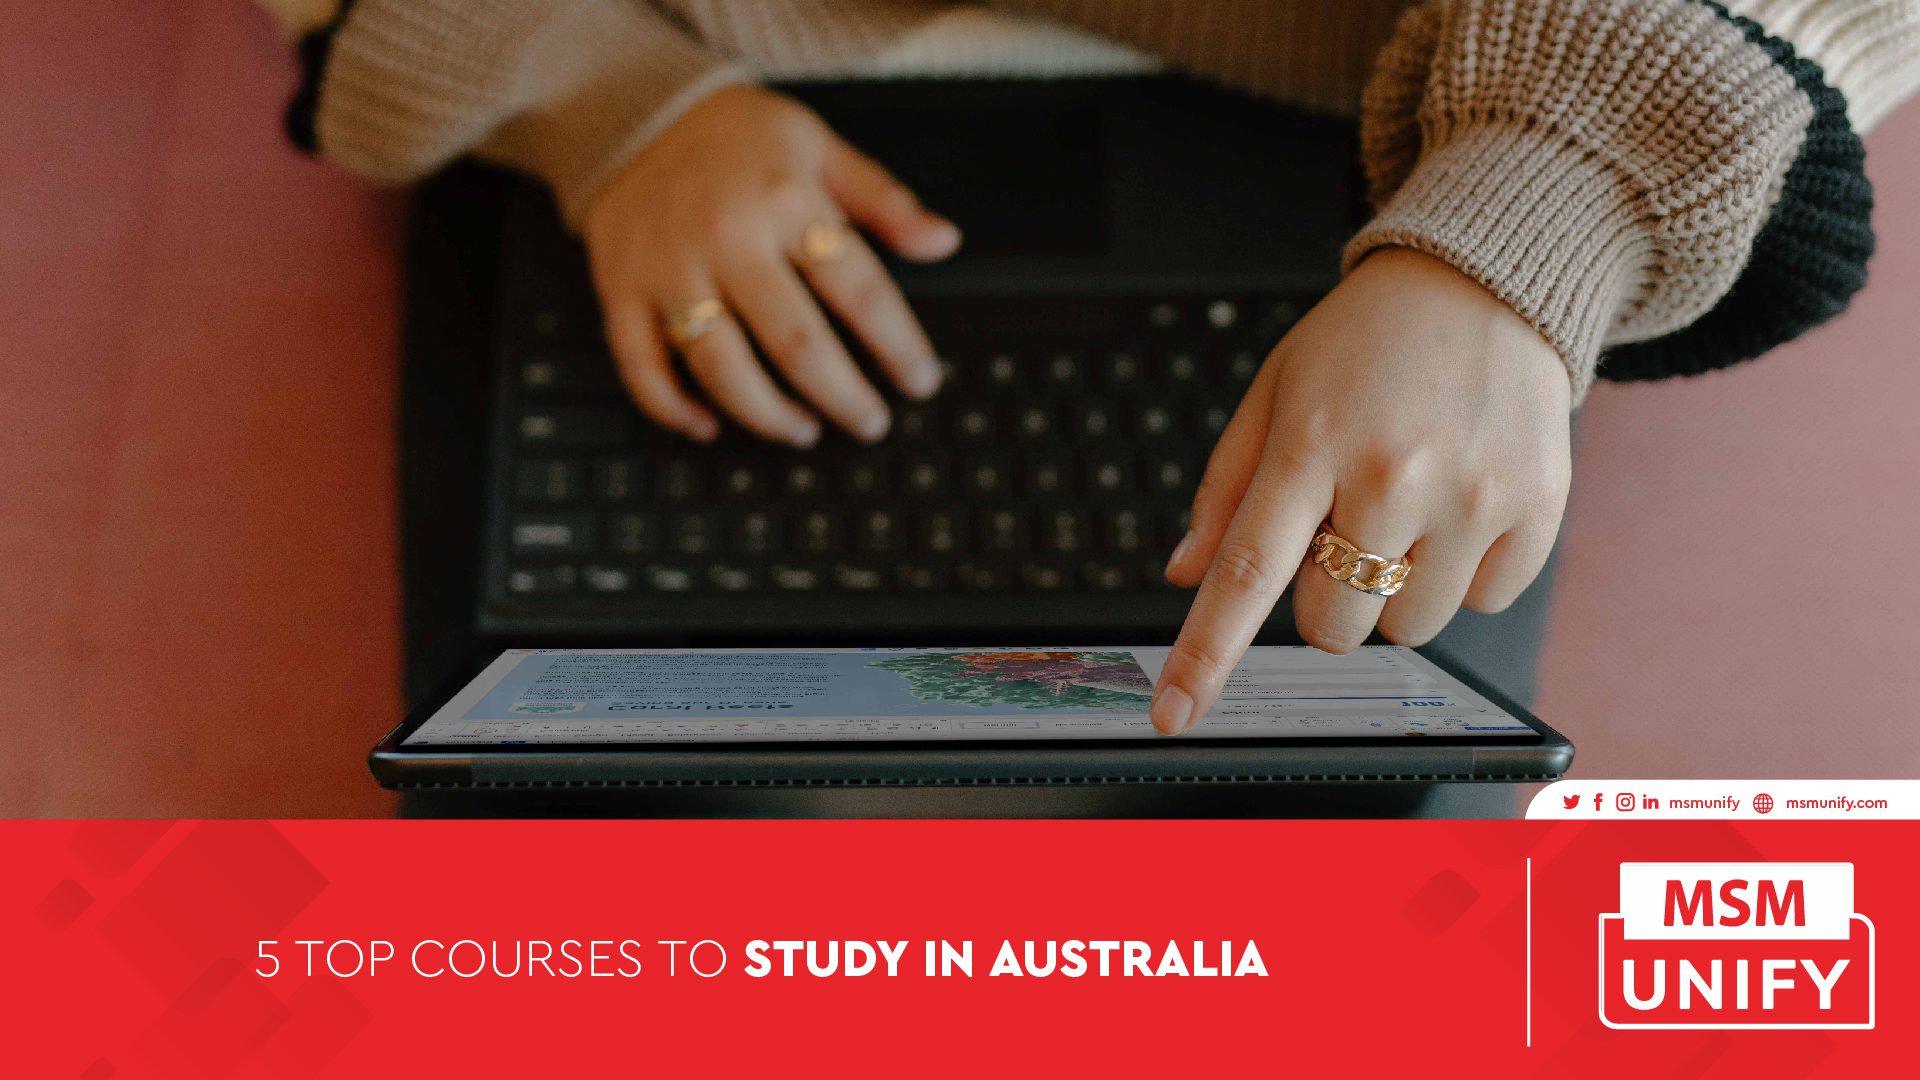 101822 MSM Unify  5 Top Courses to Study in Australia 01